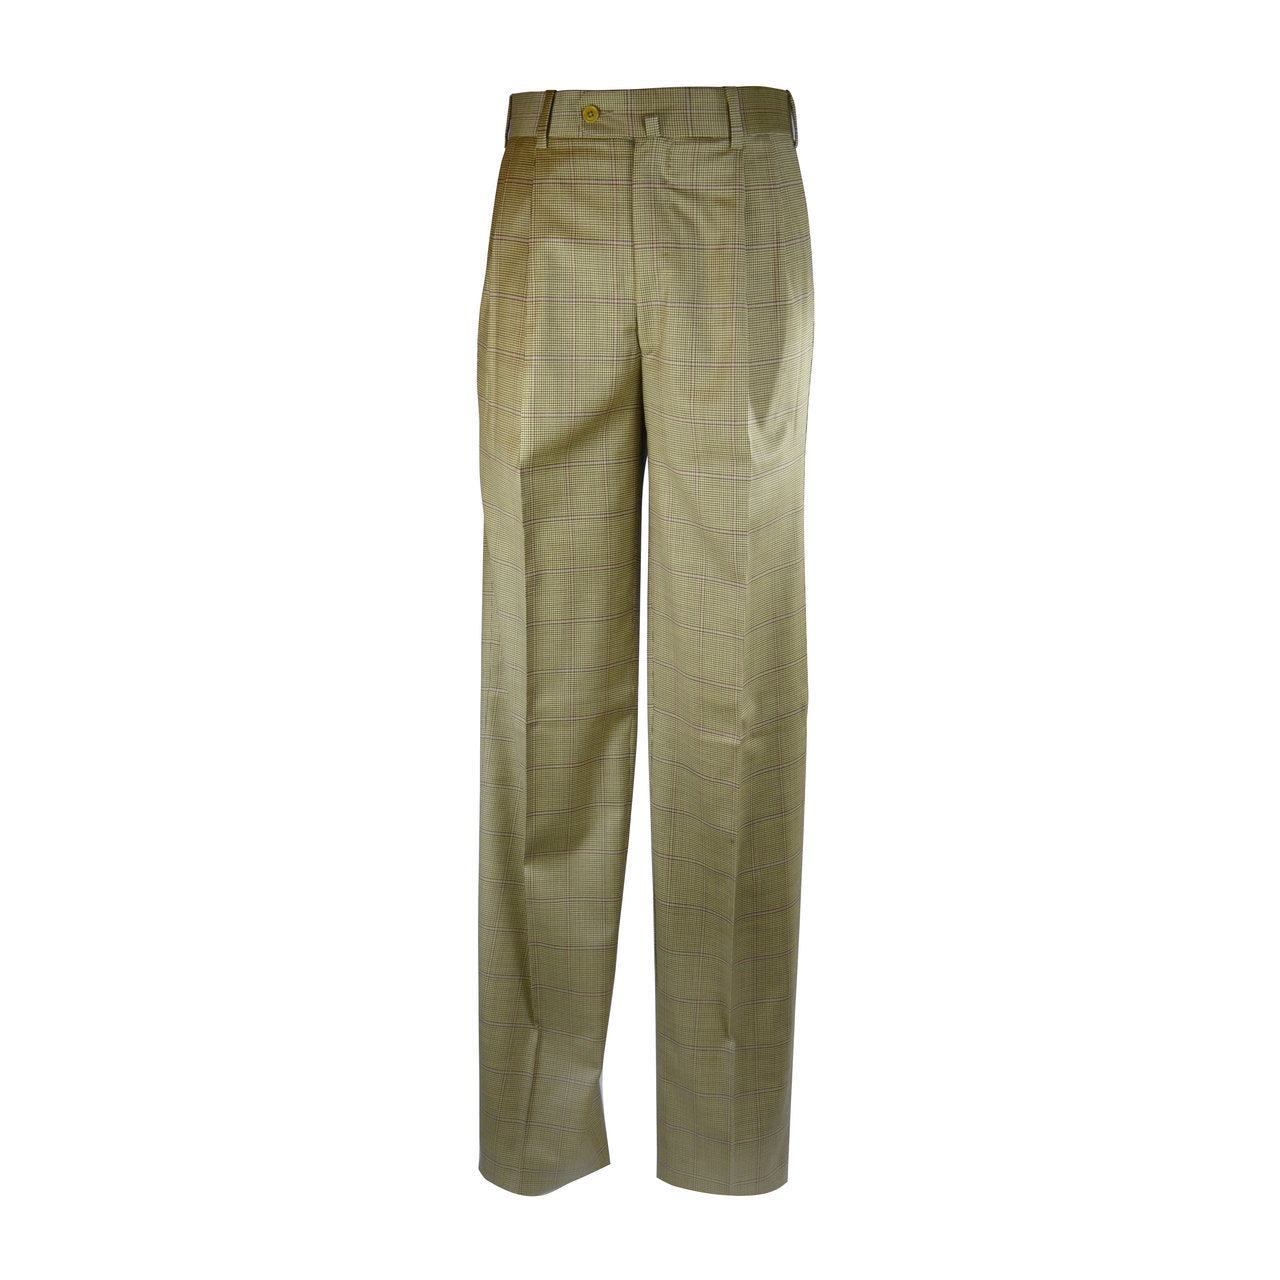 Newport Pleated Front Trouser - Saddle